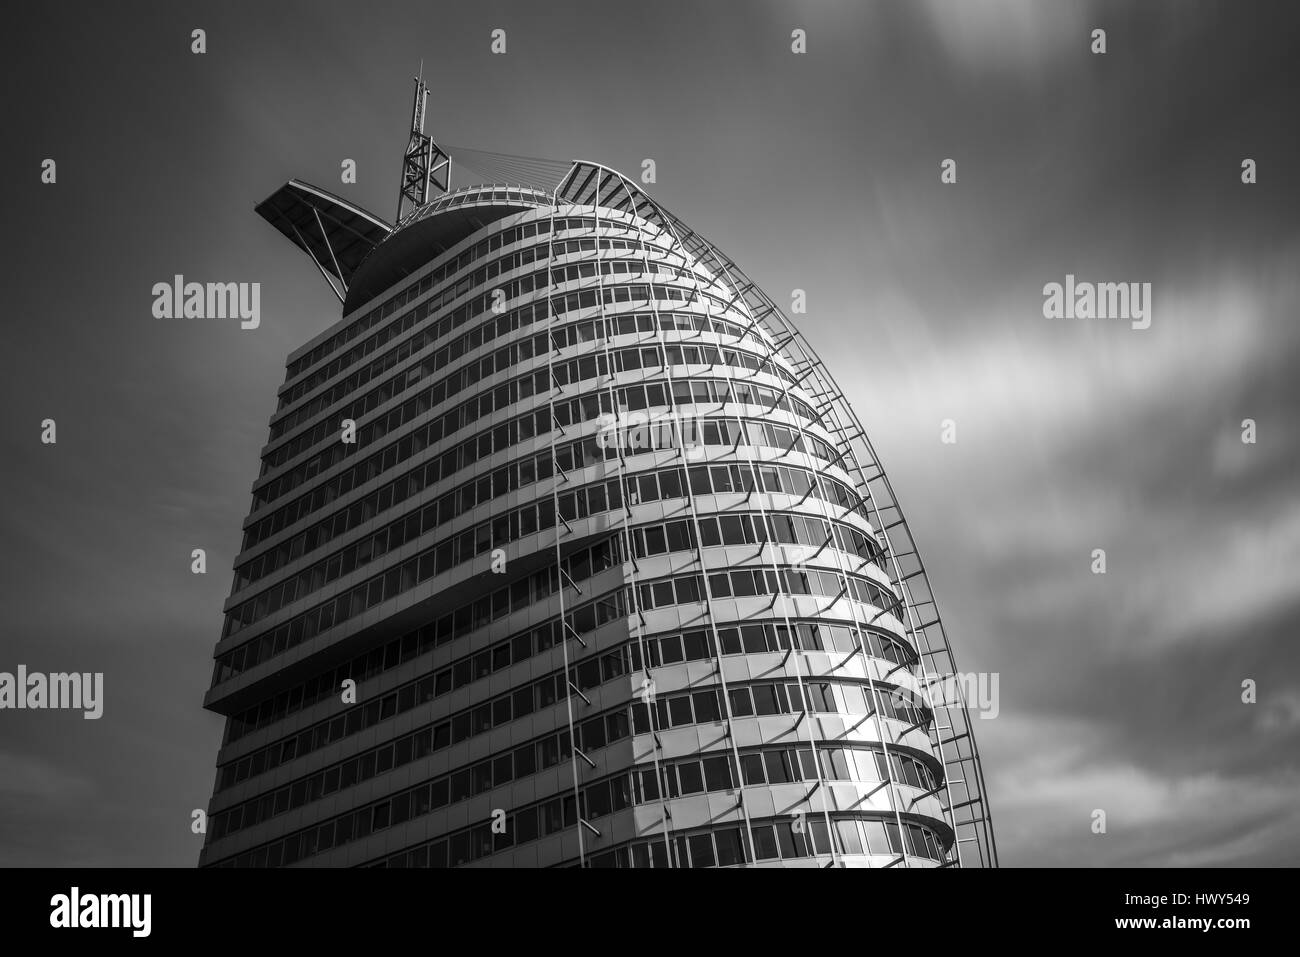 Bremerhaven, Germany - March 11, 2017: Long exposure shot of Atlantic Hotel Sail City building shaped in form of a sail resembling an iconic building  Stock Photo